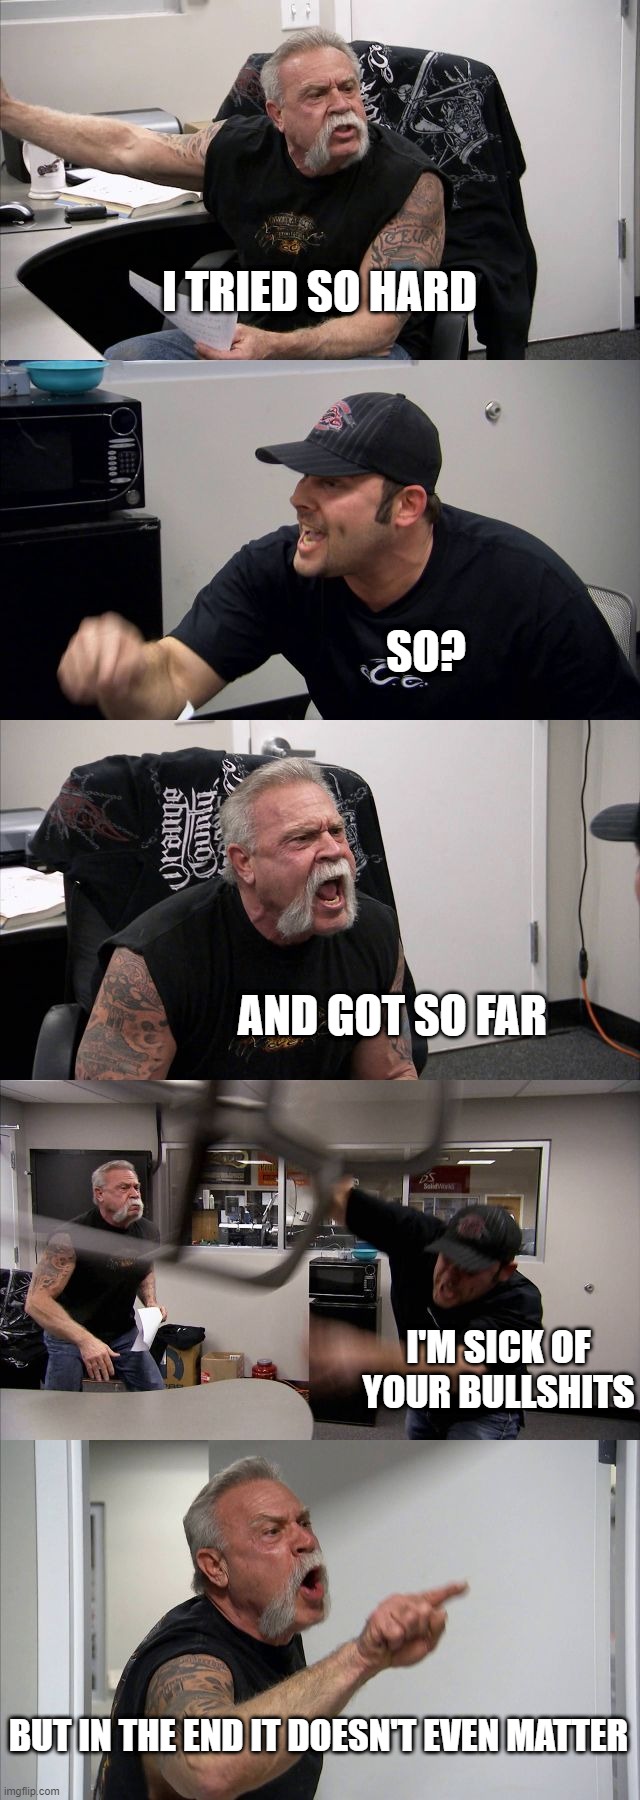 American Chopper Argument | I TRIED SO HARD; SO? AND GOT SO FAR; I'M SICK OF YOUR BULLSHITS; BUT IN THE END IT DOESN'T EVEN MATTER | image tagged in memes,american chopper argument | made w/ Imgflip meme maker